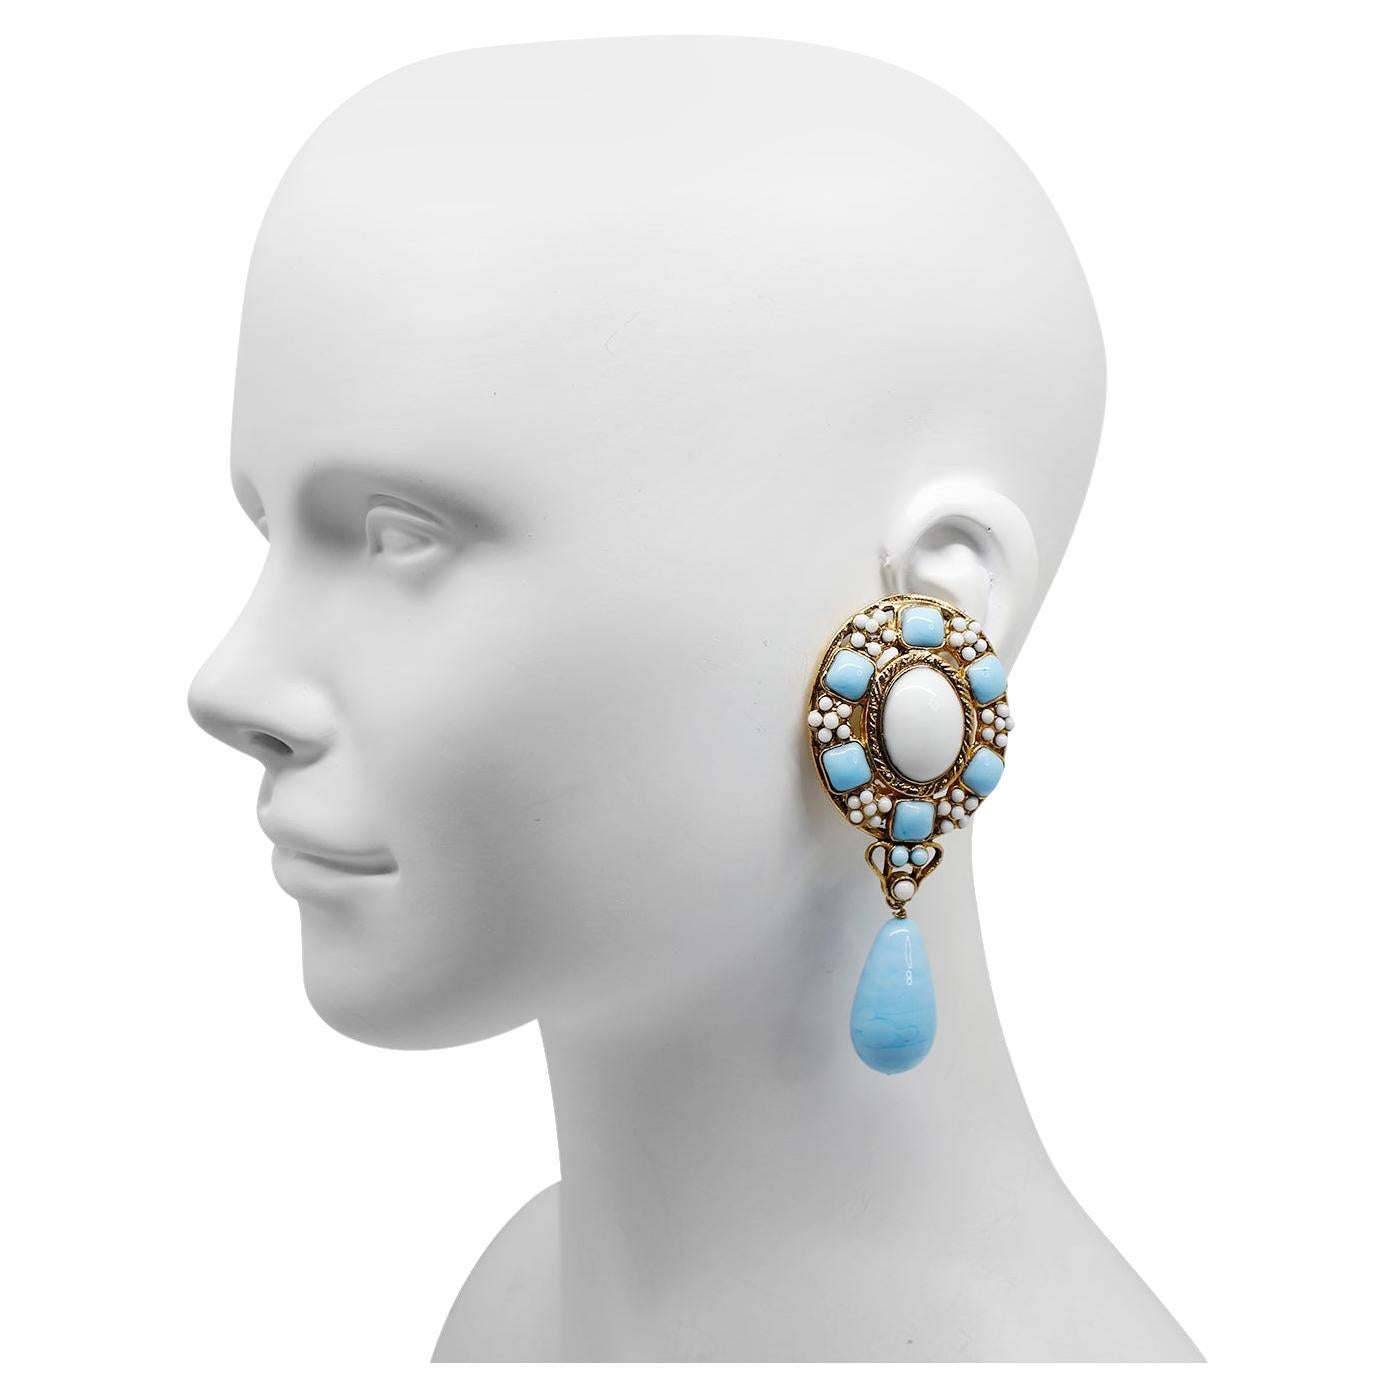 Maison Gripoix Vintage Faux Turquoise and White Dangling Earrings  set in Gold Tone. These just ooze class and style.  They will always be in style.  They look very Palm Beach or the Hamptons or the South of France or any amazing place that you can